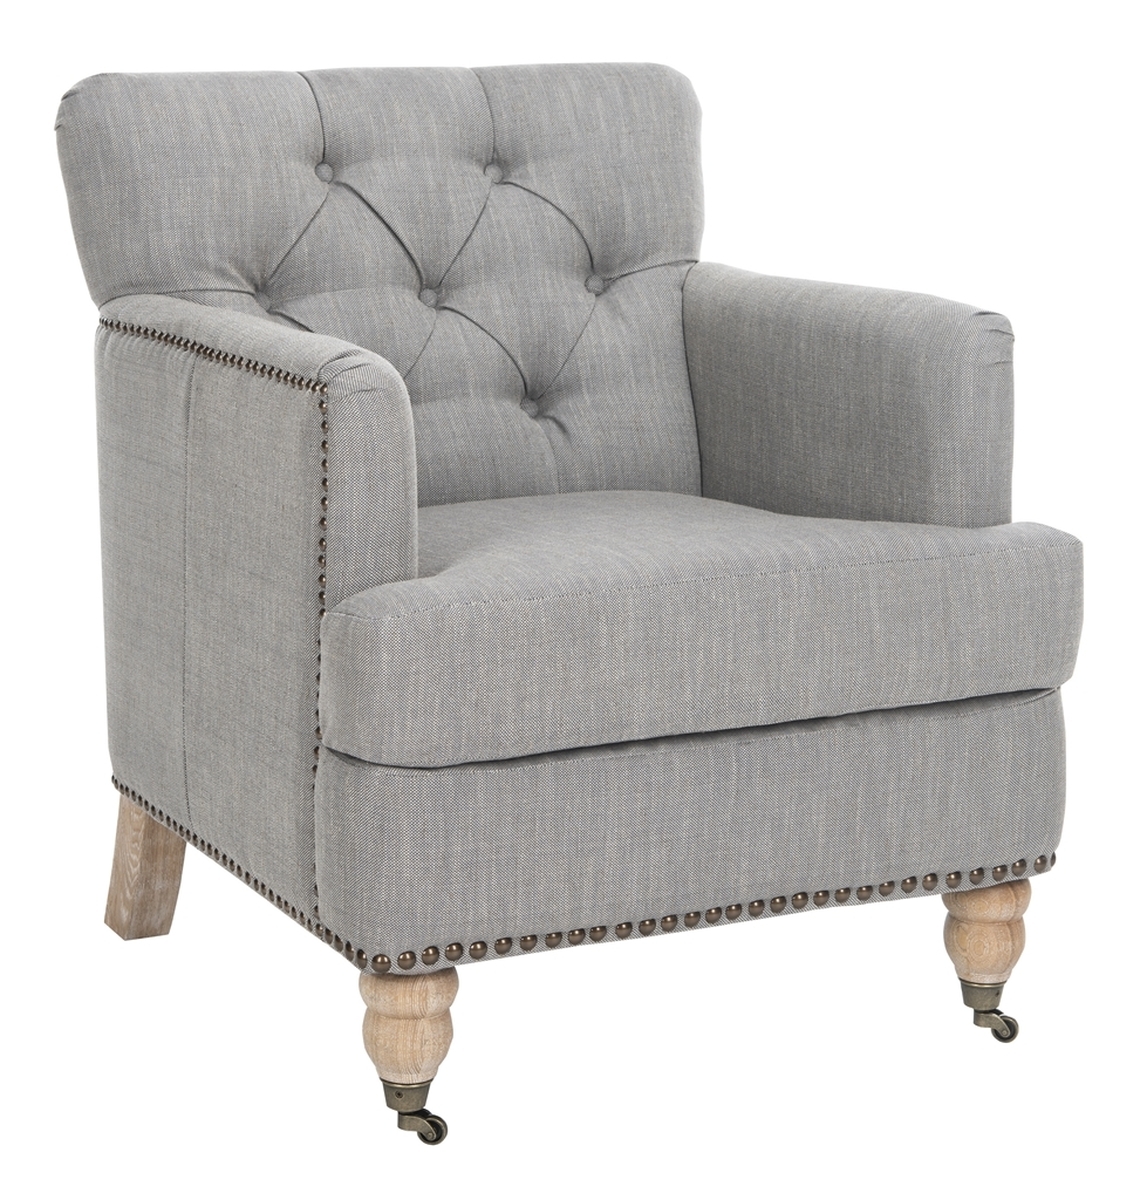 Colin Tufted Club Chair - Stone/Grey/White Wash - Arlo Home - Image 1